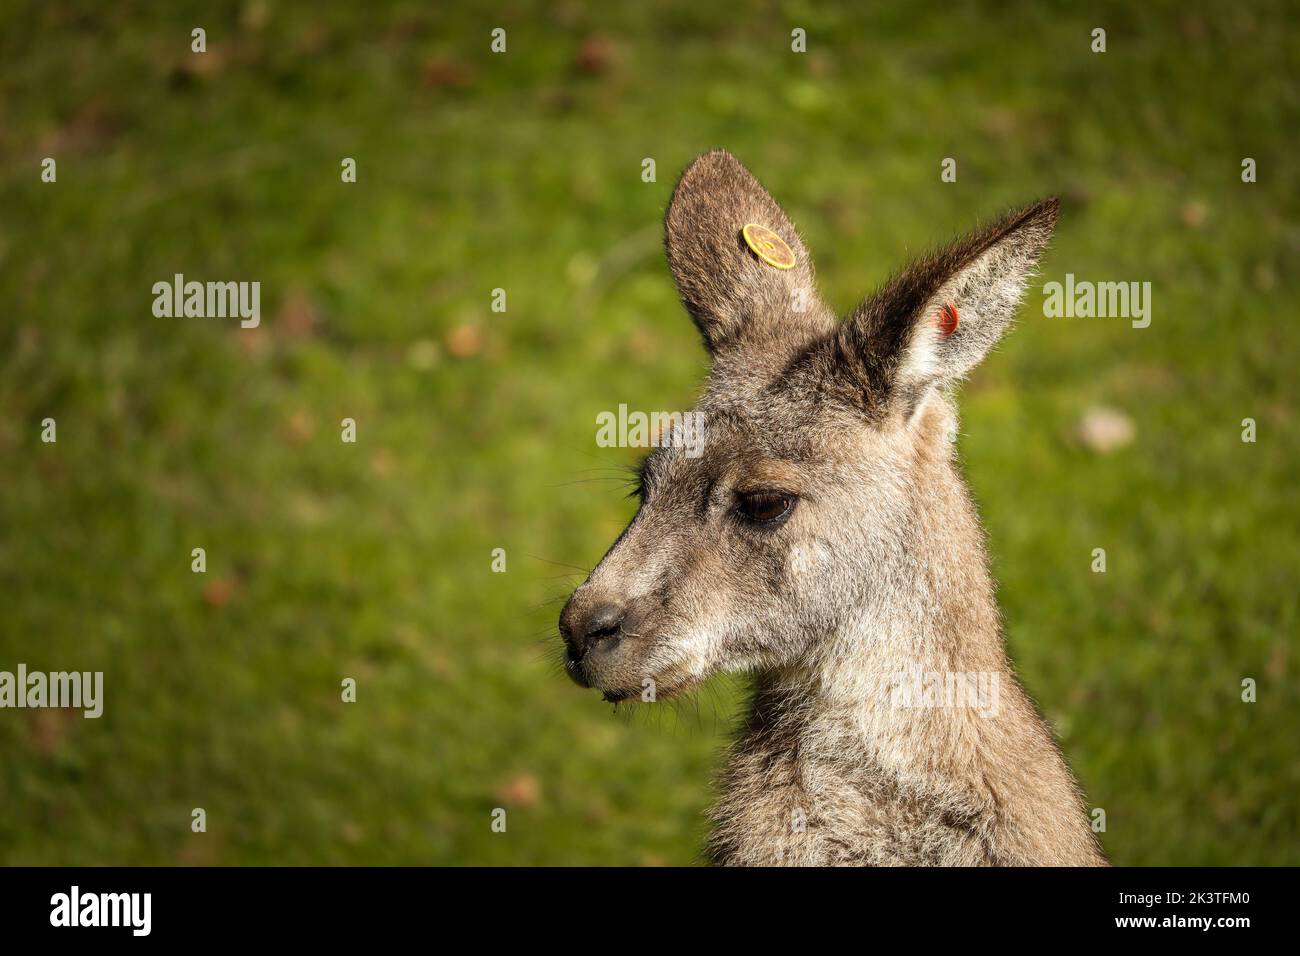 Portrait of Young Eastern Grey Kangaroo with Green Grass Background. Macropus Giganteus in Zoological Garden. Stock Photo